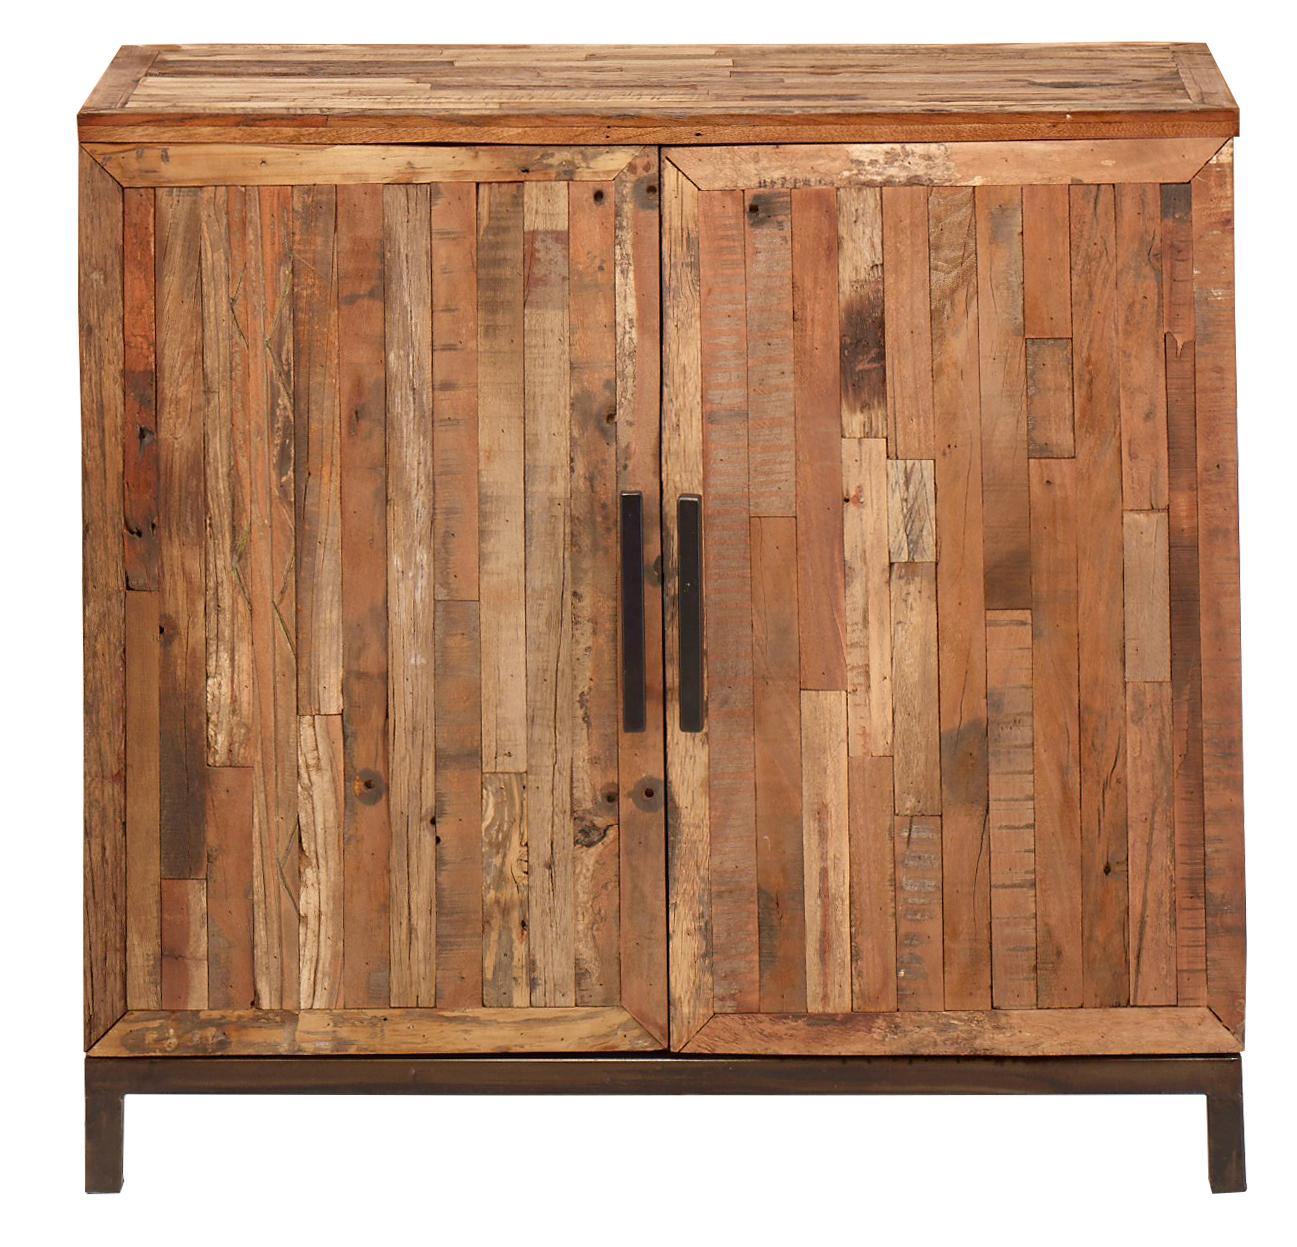 Rustic Cabinet DSE-1617 Ironwood DSE-1617 in Brown 